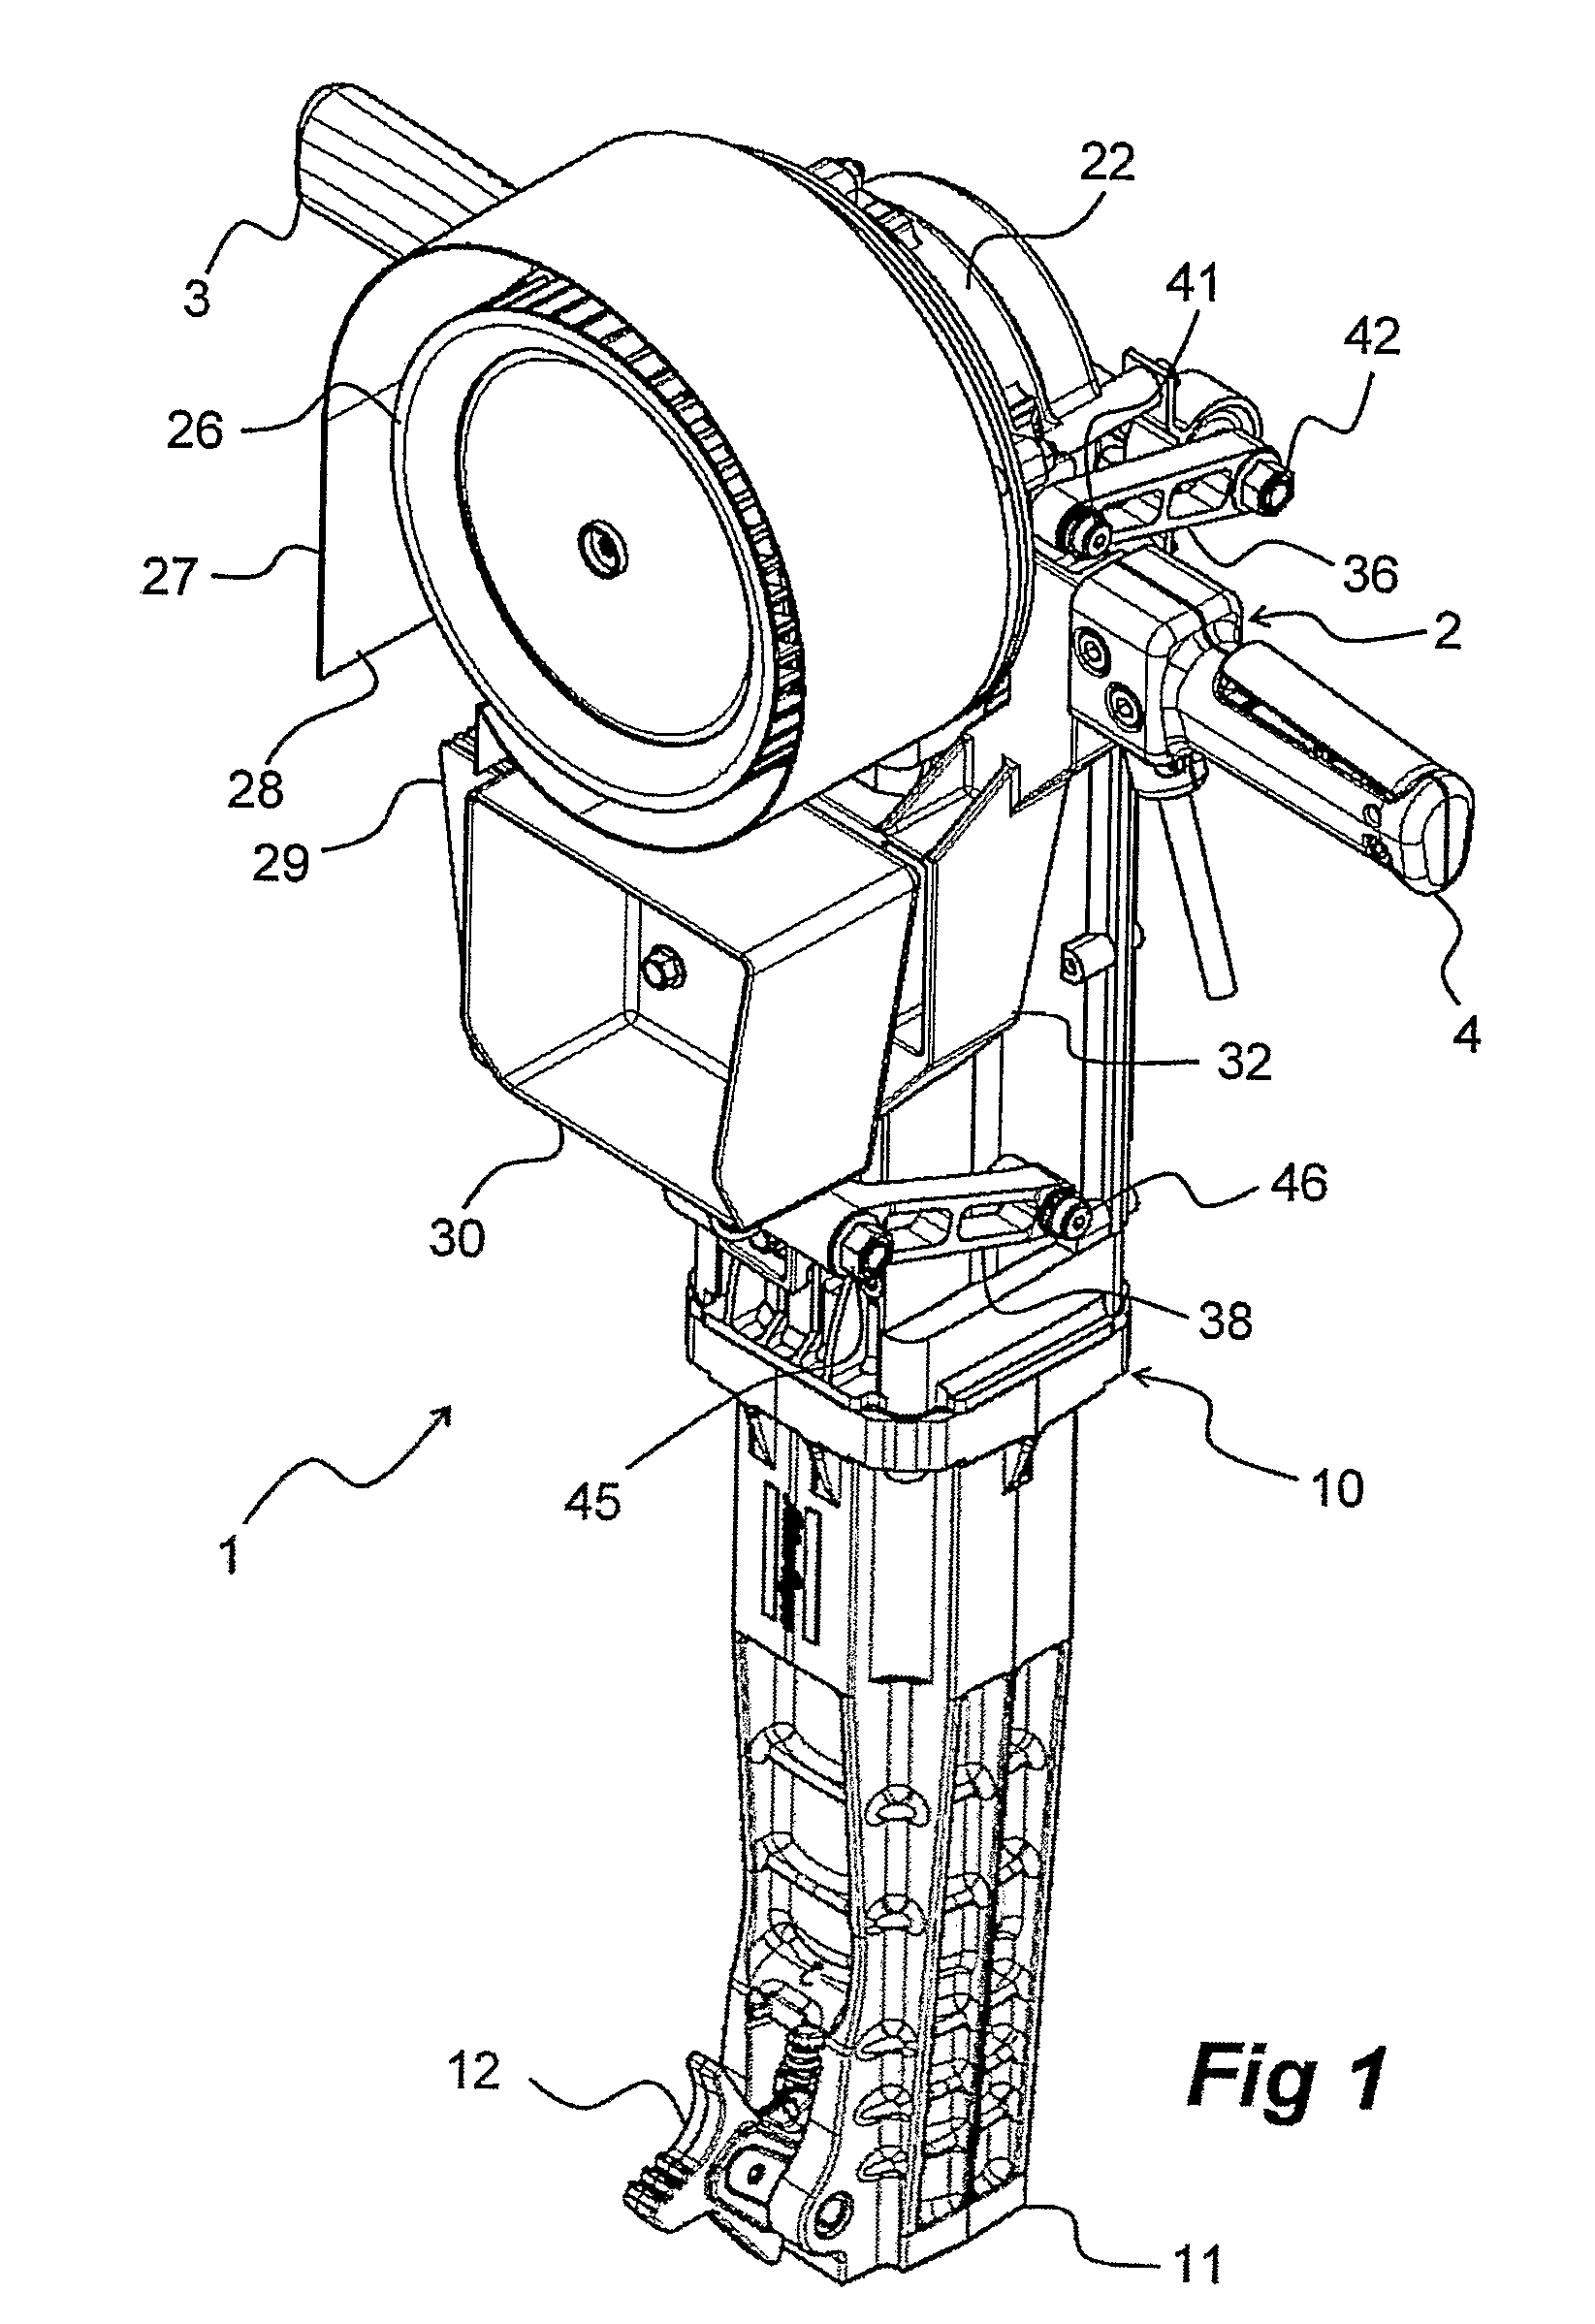 Breaker tool with vibration damped handle device